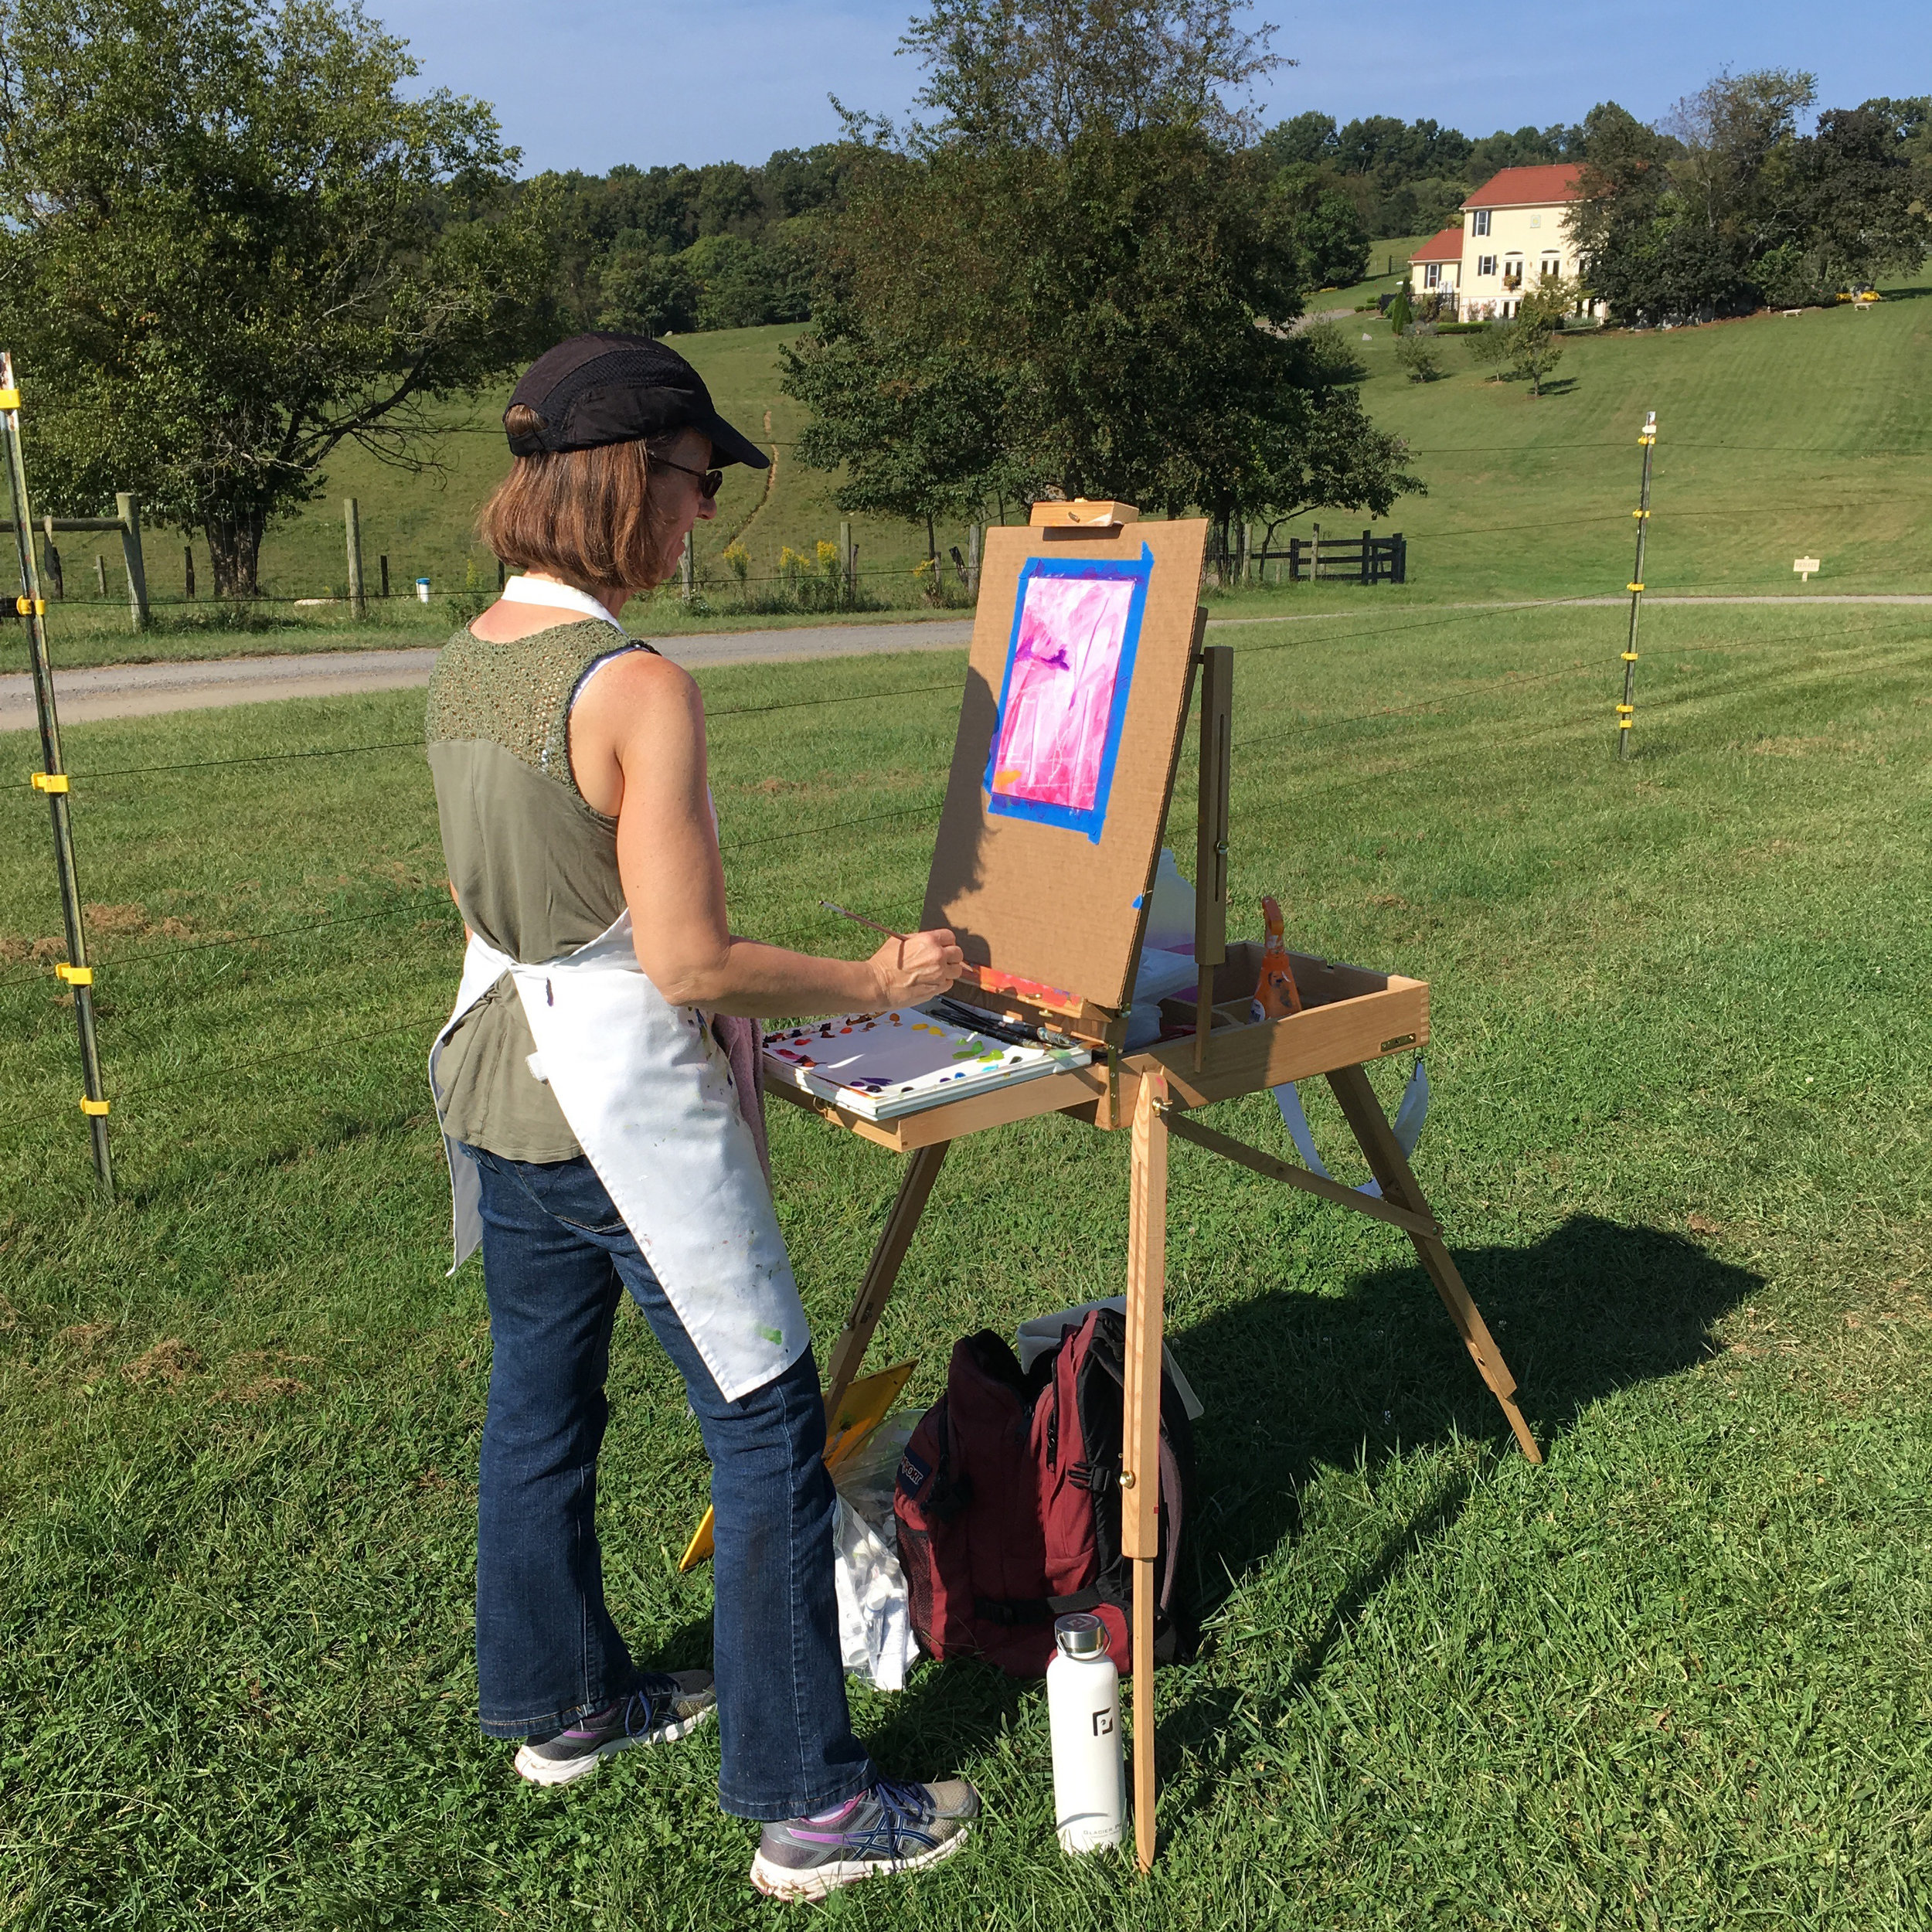 My Favorite Plein Air Easel and Palette